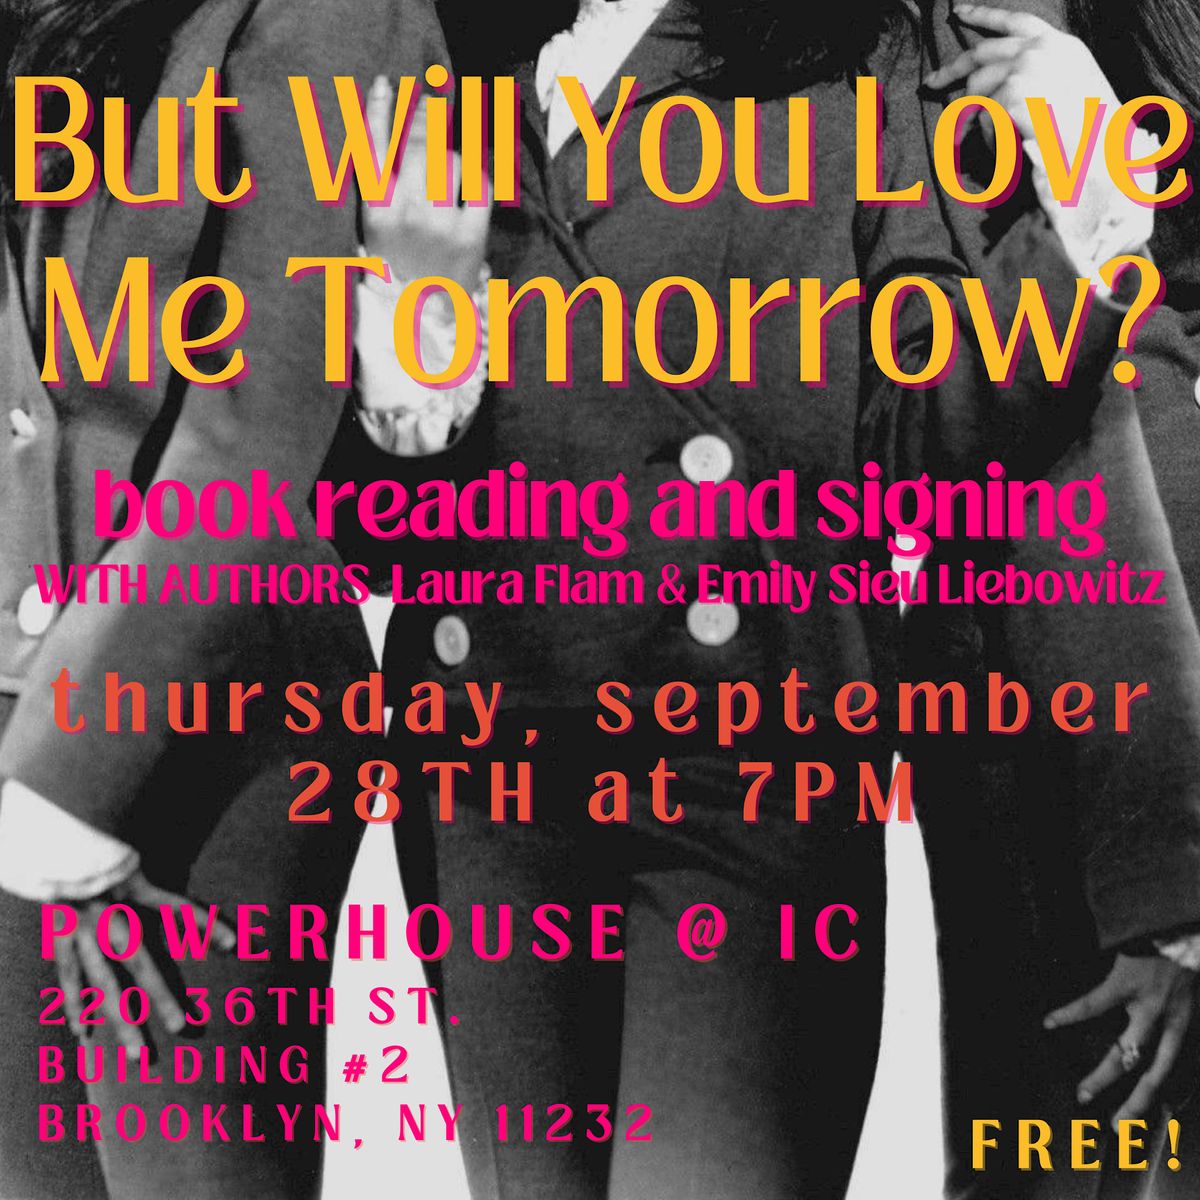 "But Will You Love Me Tomorrow?" Book Reading and Signing